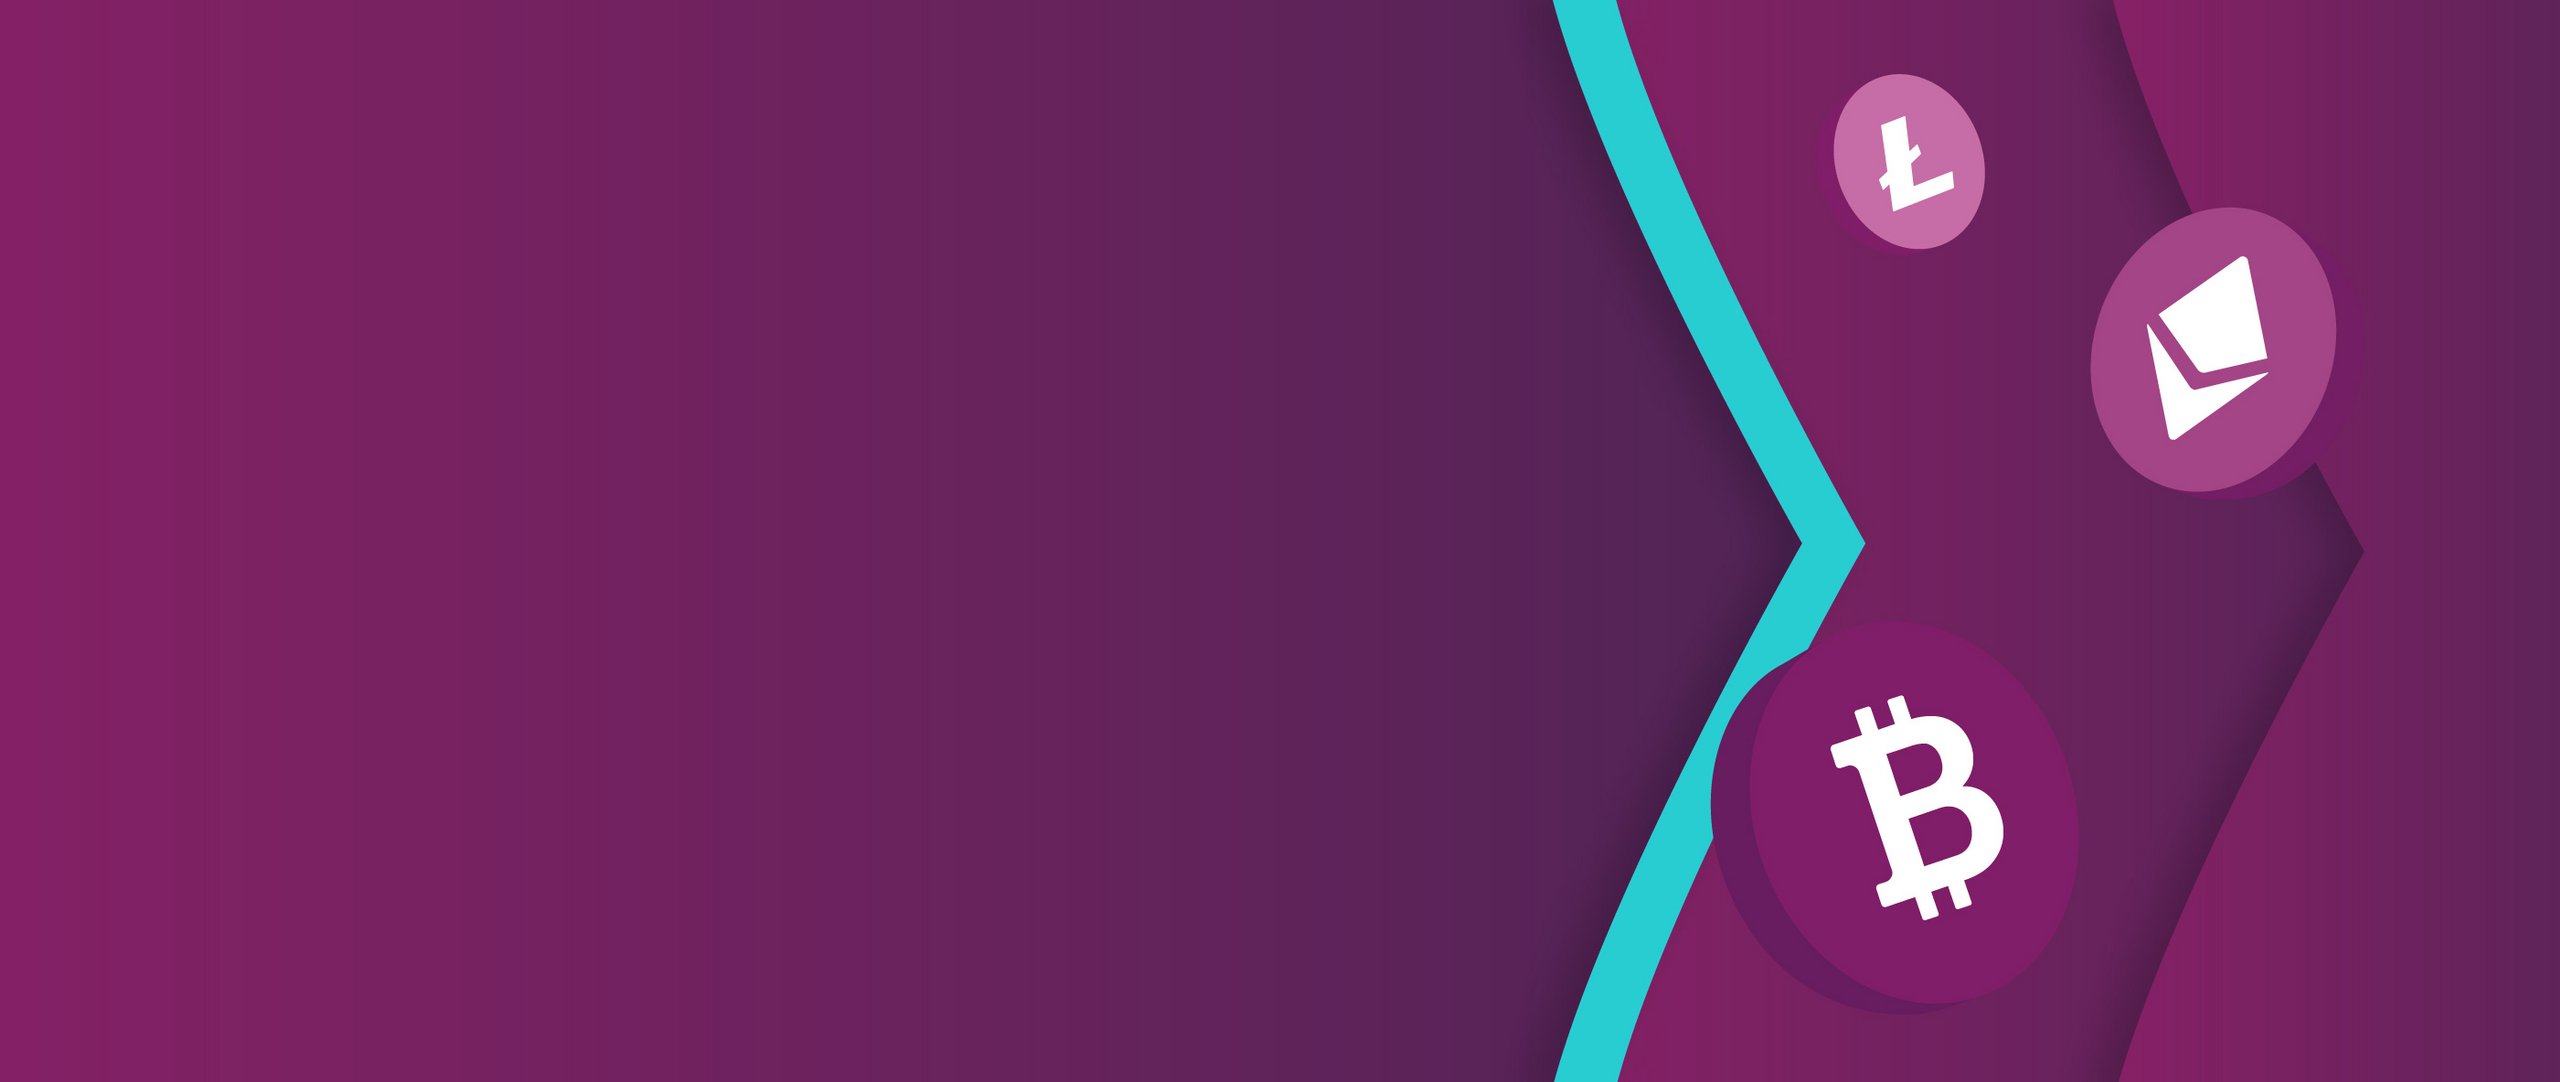 Skrill arrows branded in purple and teal, as background to crypto currency symbols